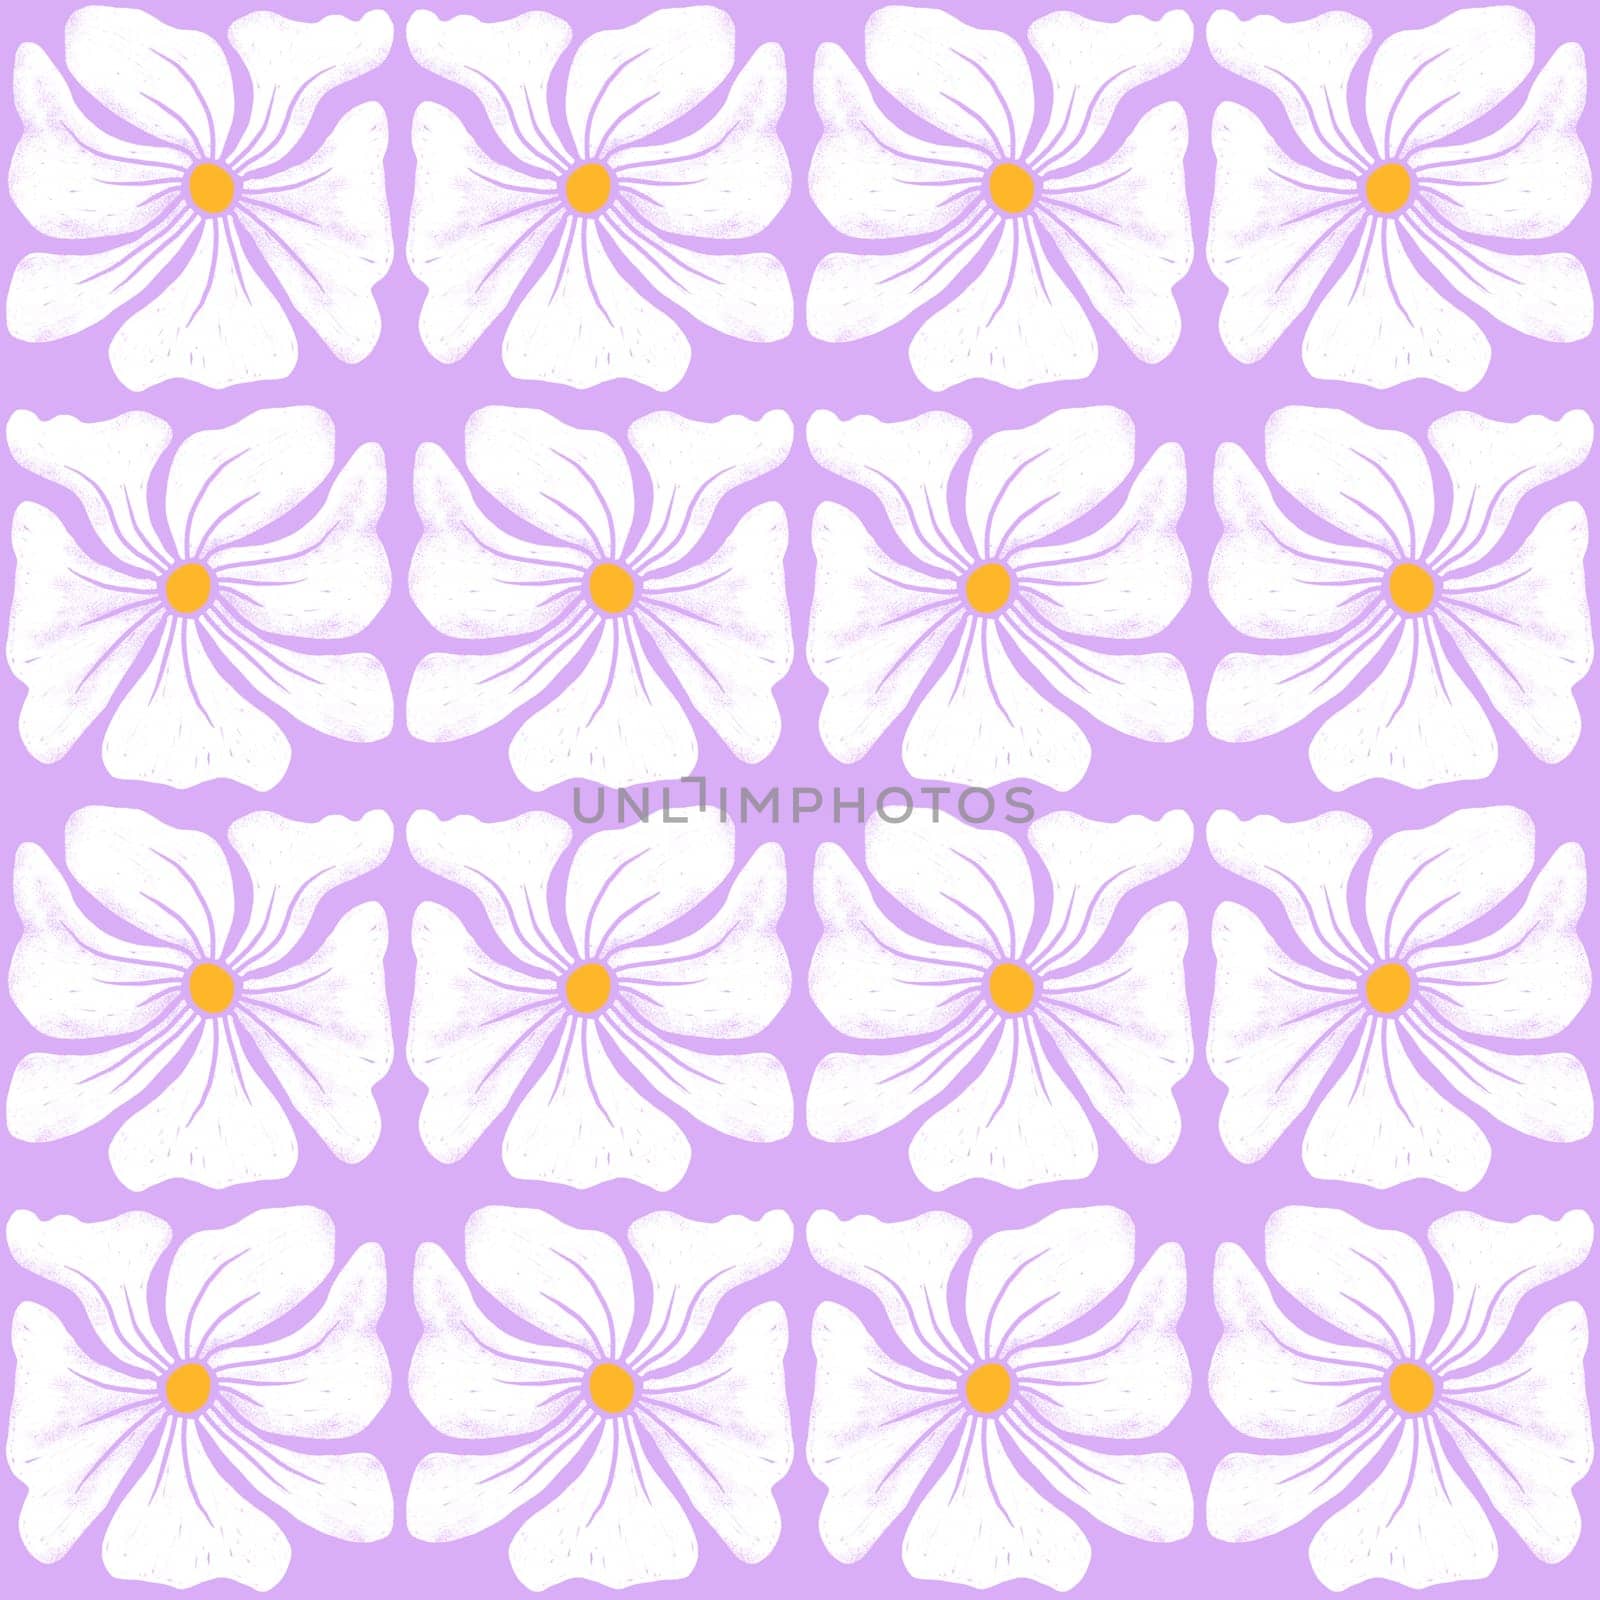 Hand drawn seamless pattern with white mid century modern daisy flowers on purplebackground. Retro vintage floral print with red blobs, hippie bloom blossom nature design, warm pastel color